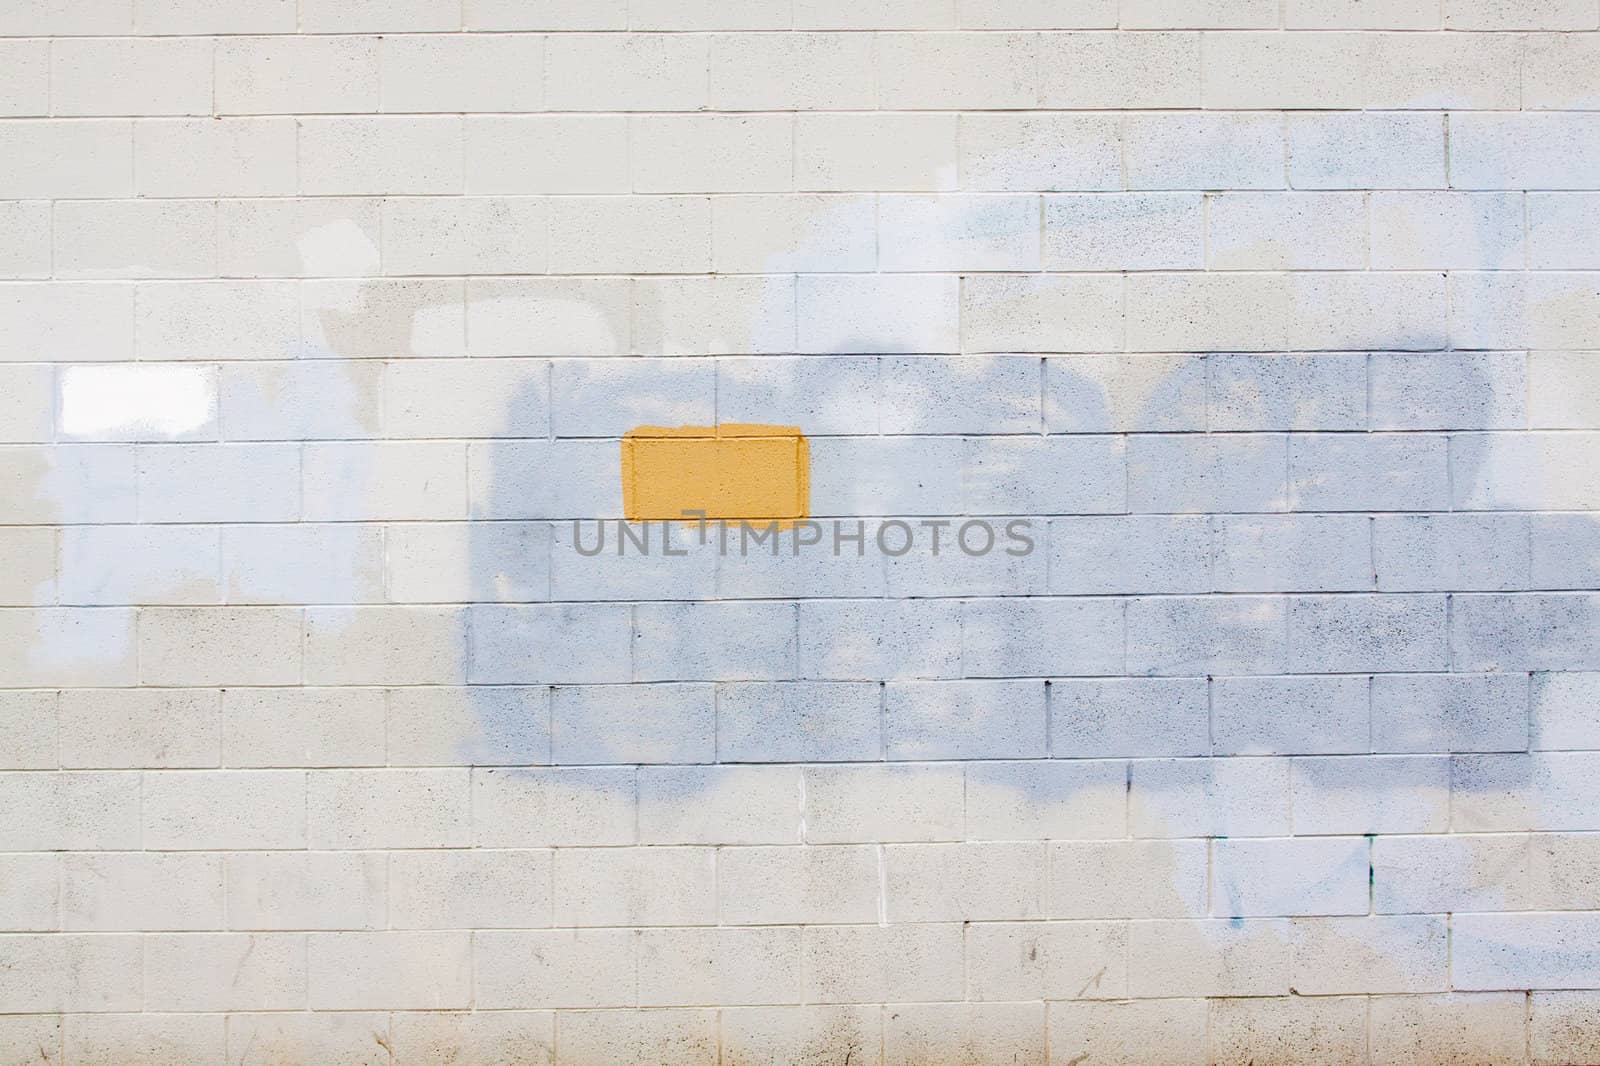 A grey wall has rectangular and square patches of paint used to cover up graffiti and vandalism along the side of an urban building.